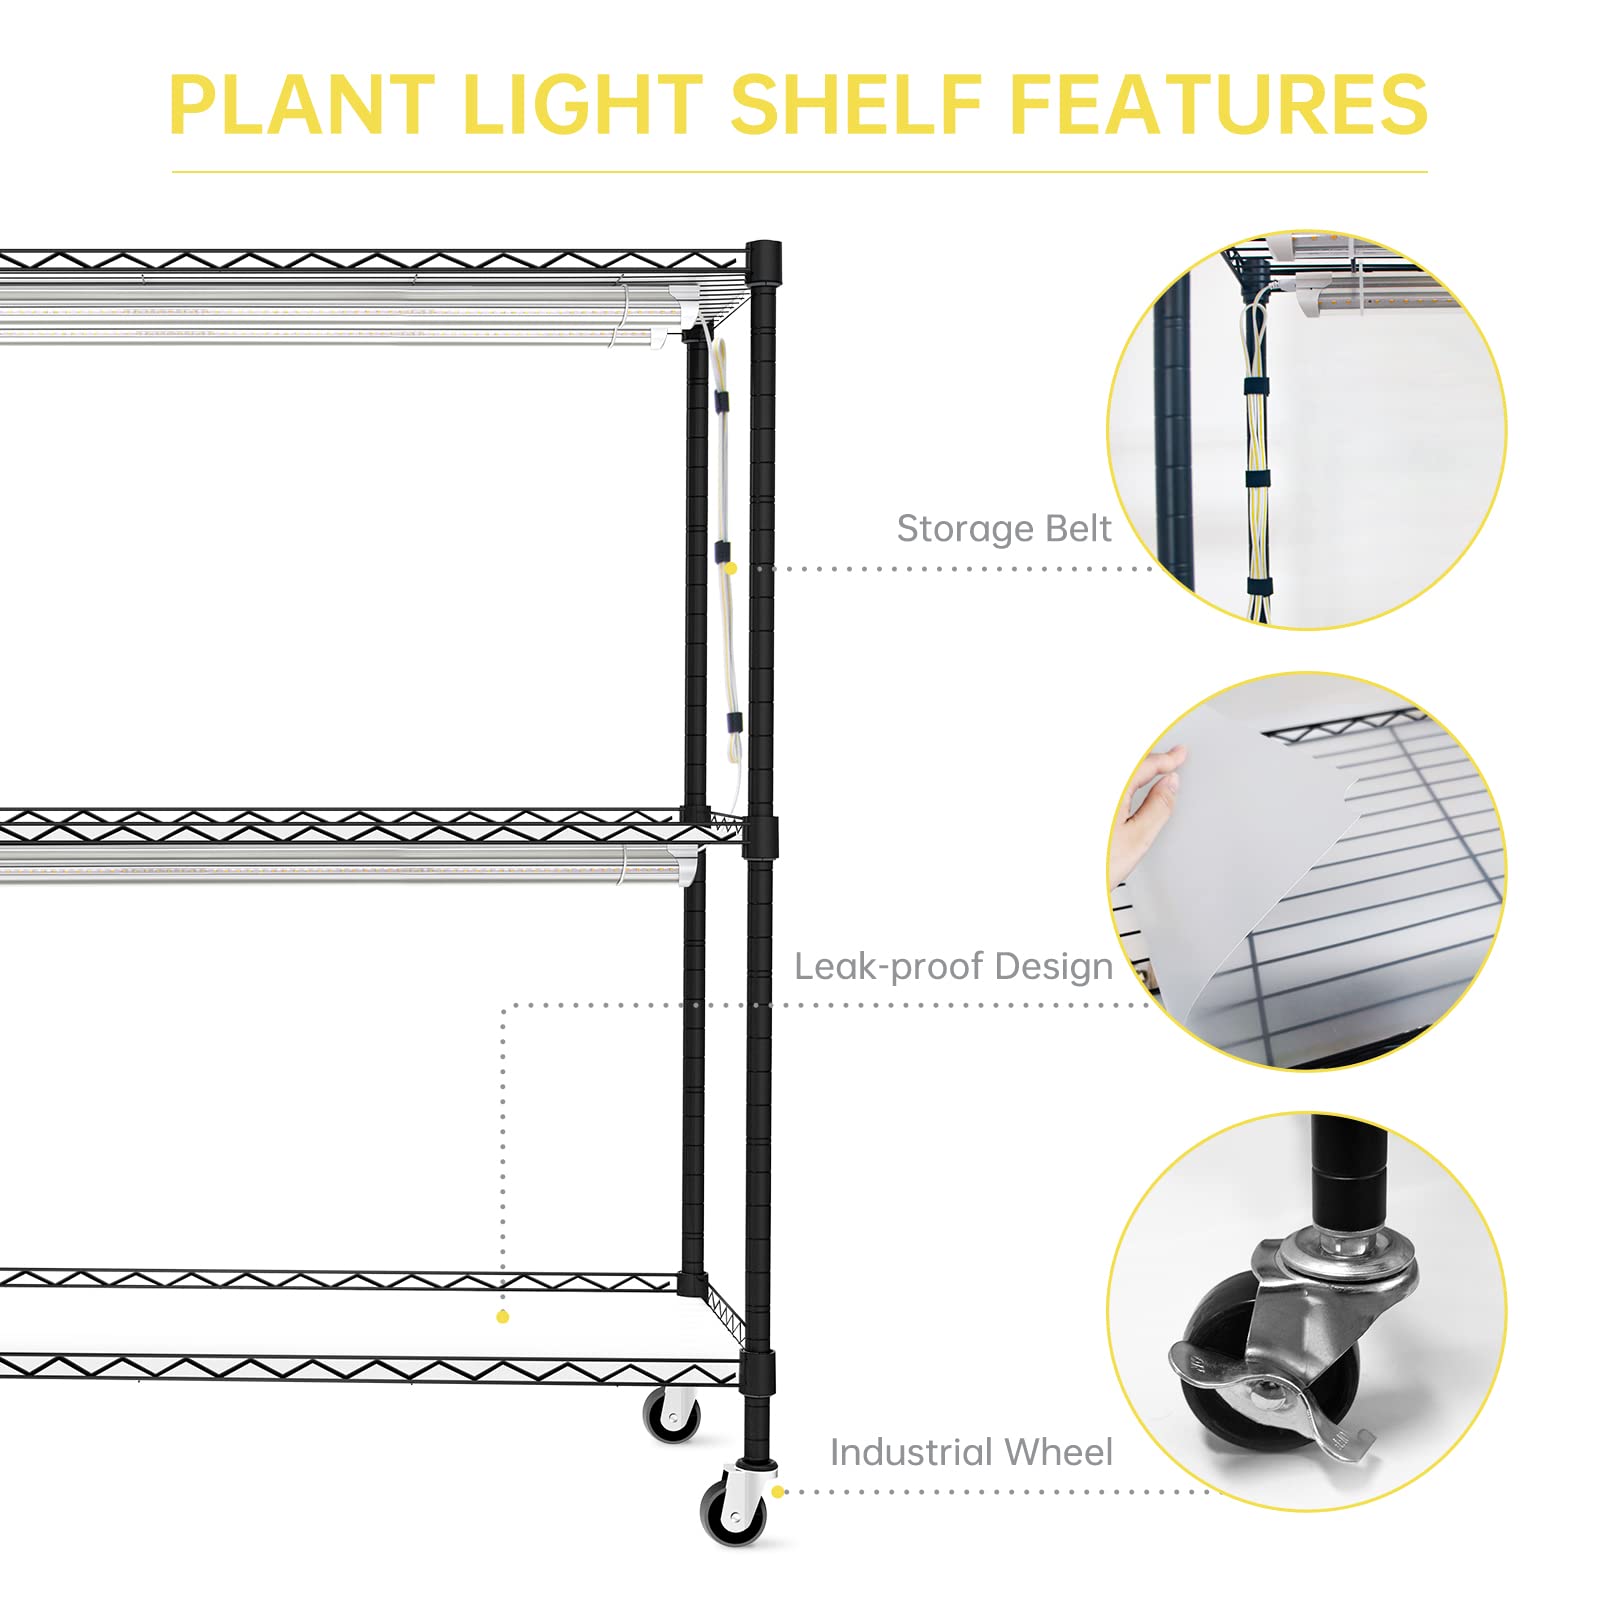 Bstrip DIY Plant Shelf with Grow Light, Grow Light Shelf with Adjustable Rack and Wheels, Plant Stand, 8-Pack 192W T8 3000K Full Spectrum Grow Lights for Seed Starting,Seed Tray(29.5L x 13.8W x70.9H)